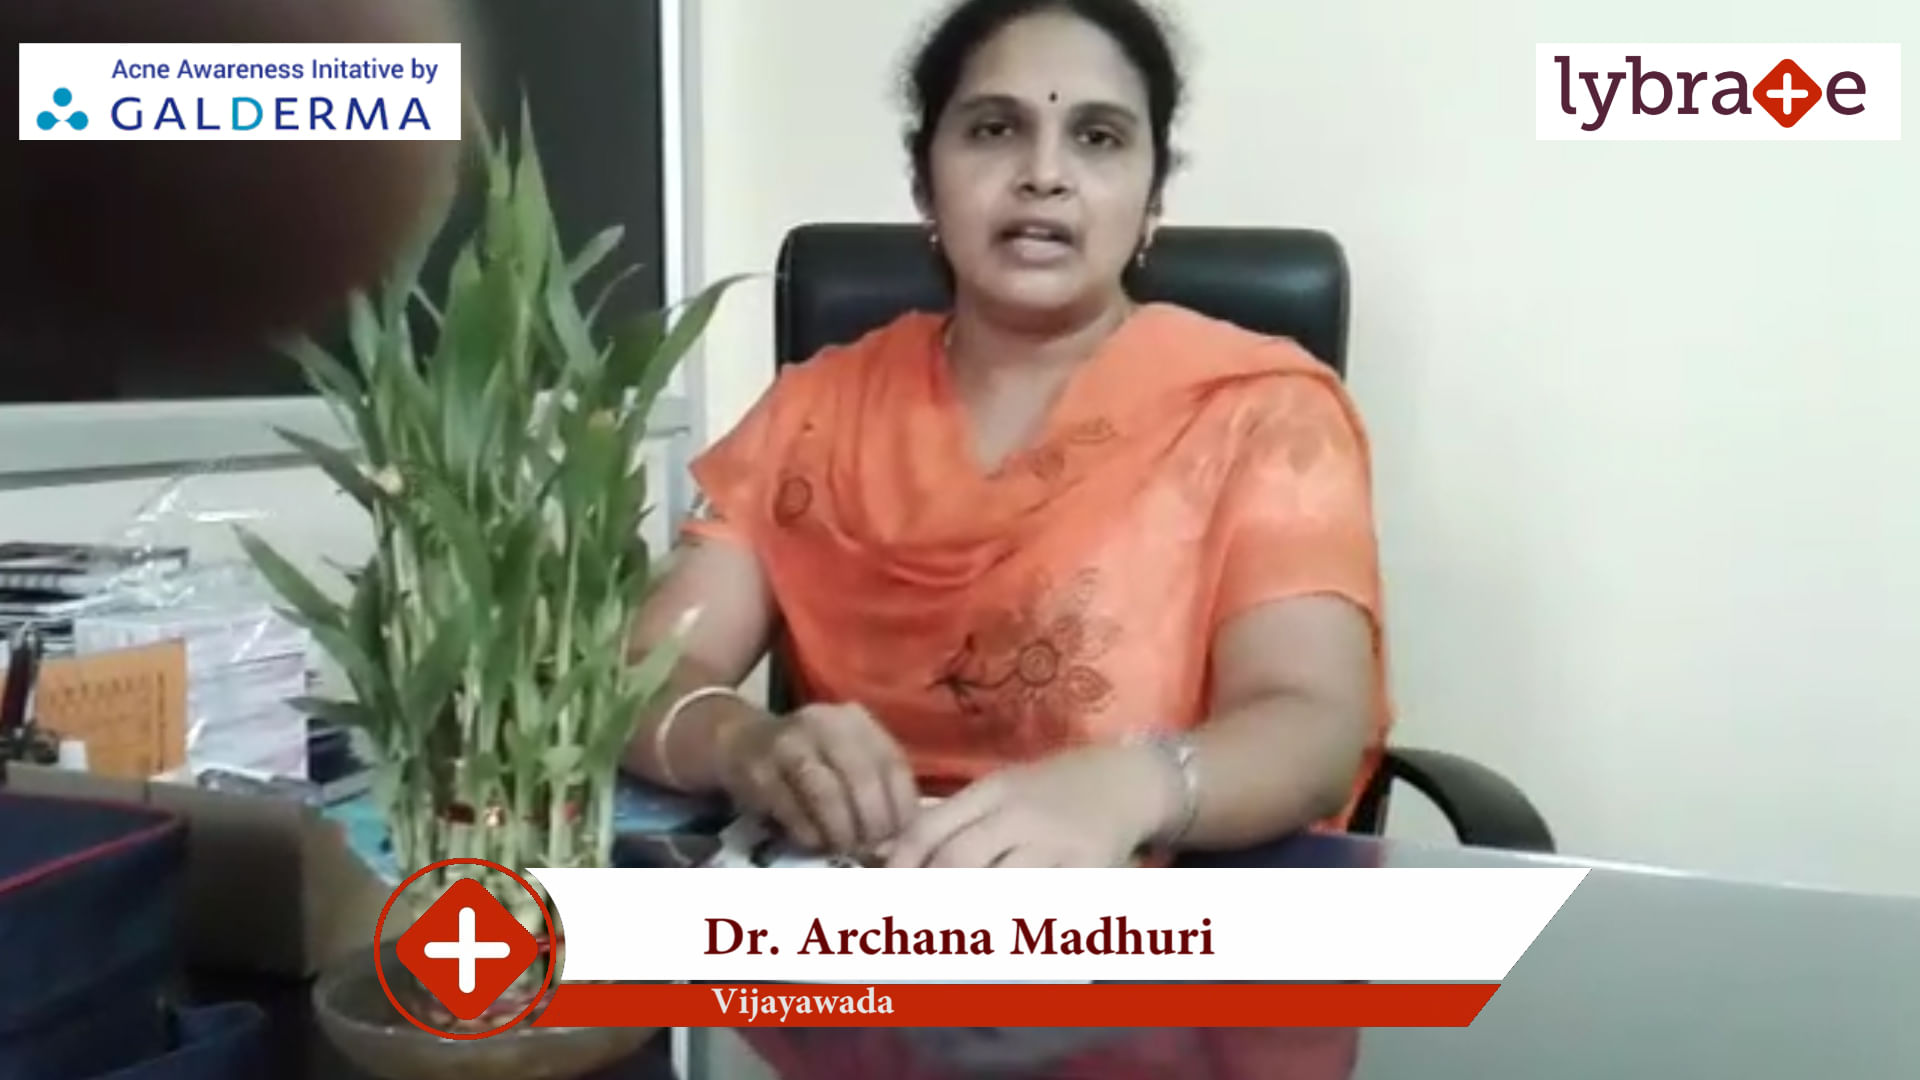 Lybrate | Dr. Archana Madhuri speaks on IMPORTANCE OF TREATING ACNE EARLY